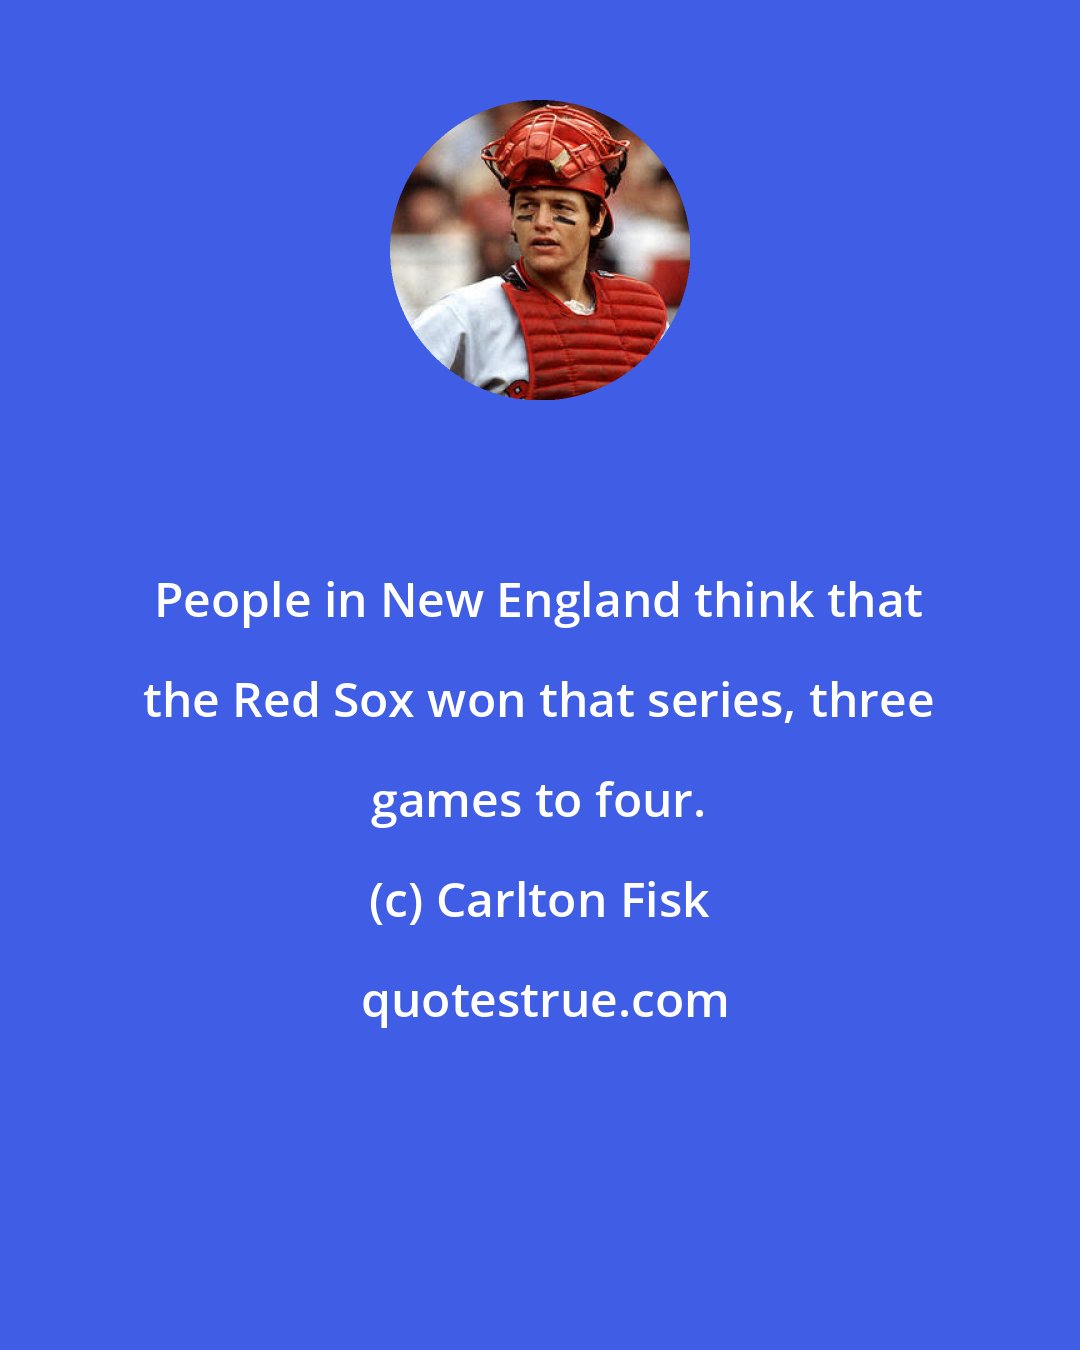 Carlton Fisk: People in New England think that the Red Sox won that series, three games to four.